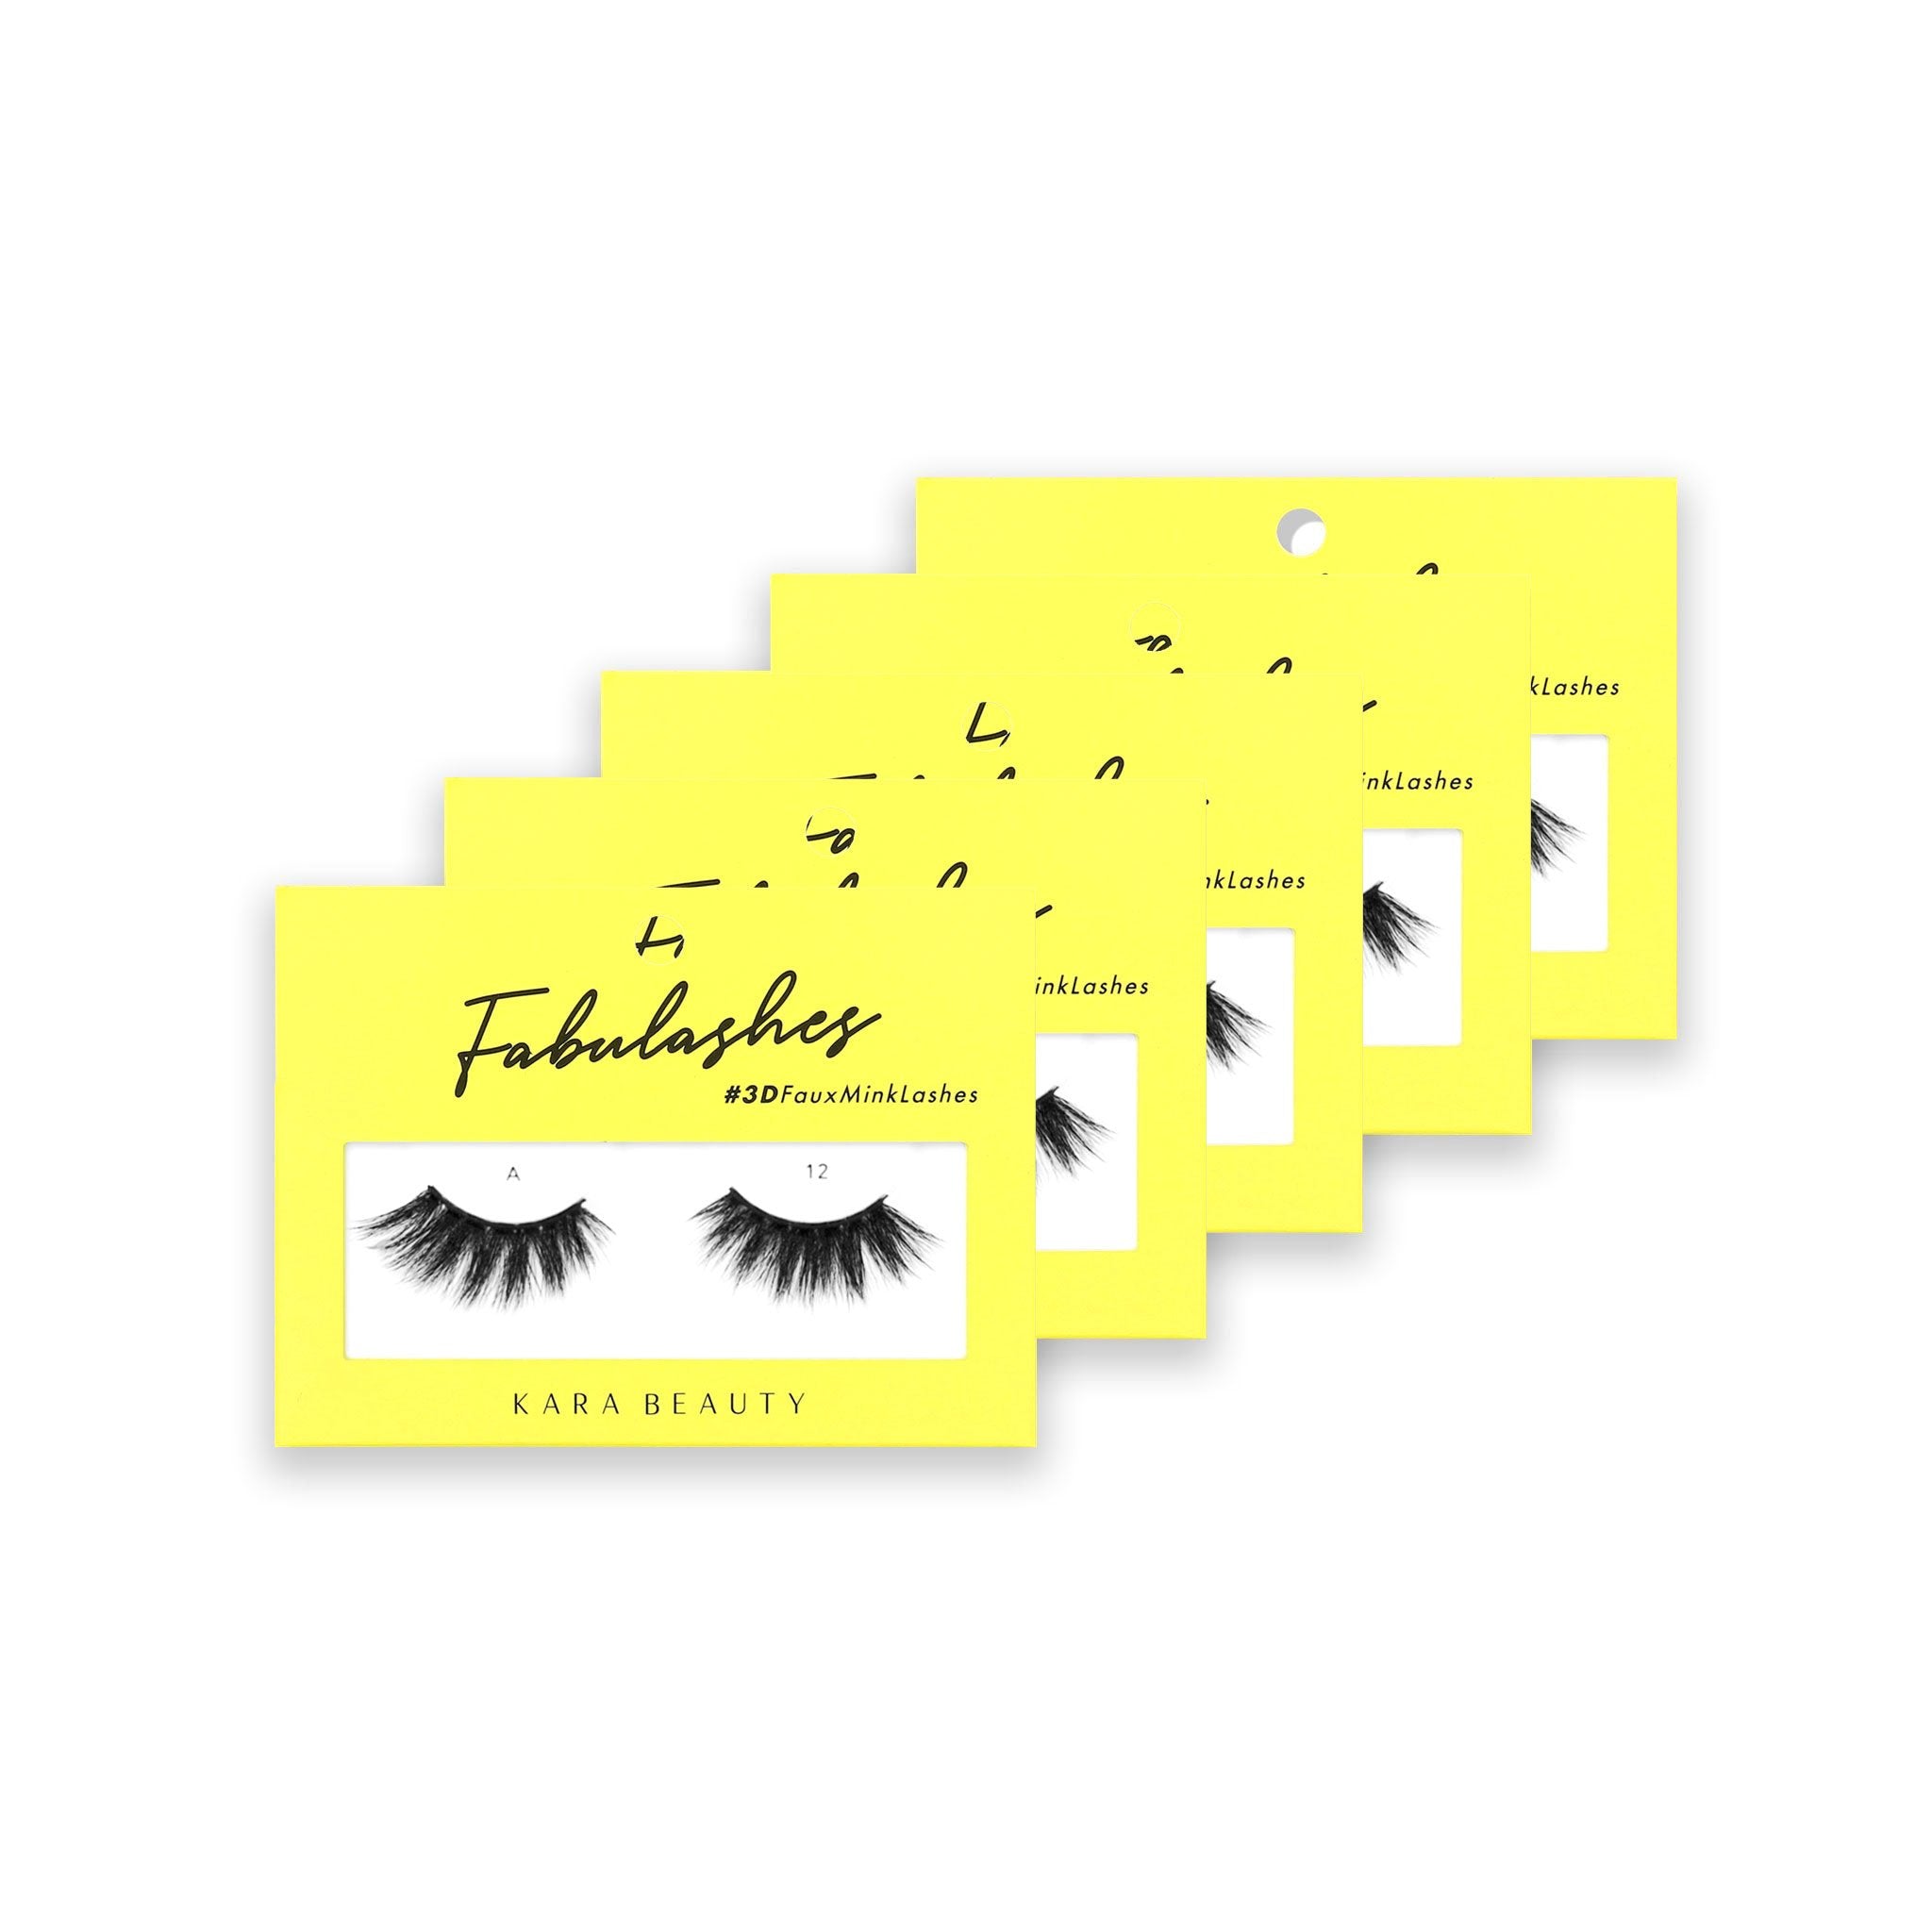 Style A12 Fabulashes 3D faux mink strip eyelashes 5 pack